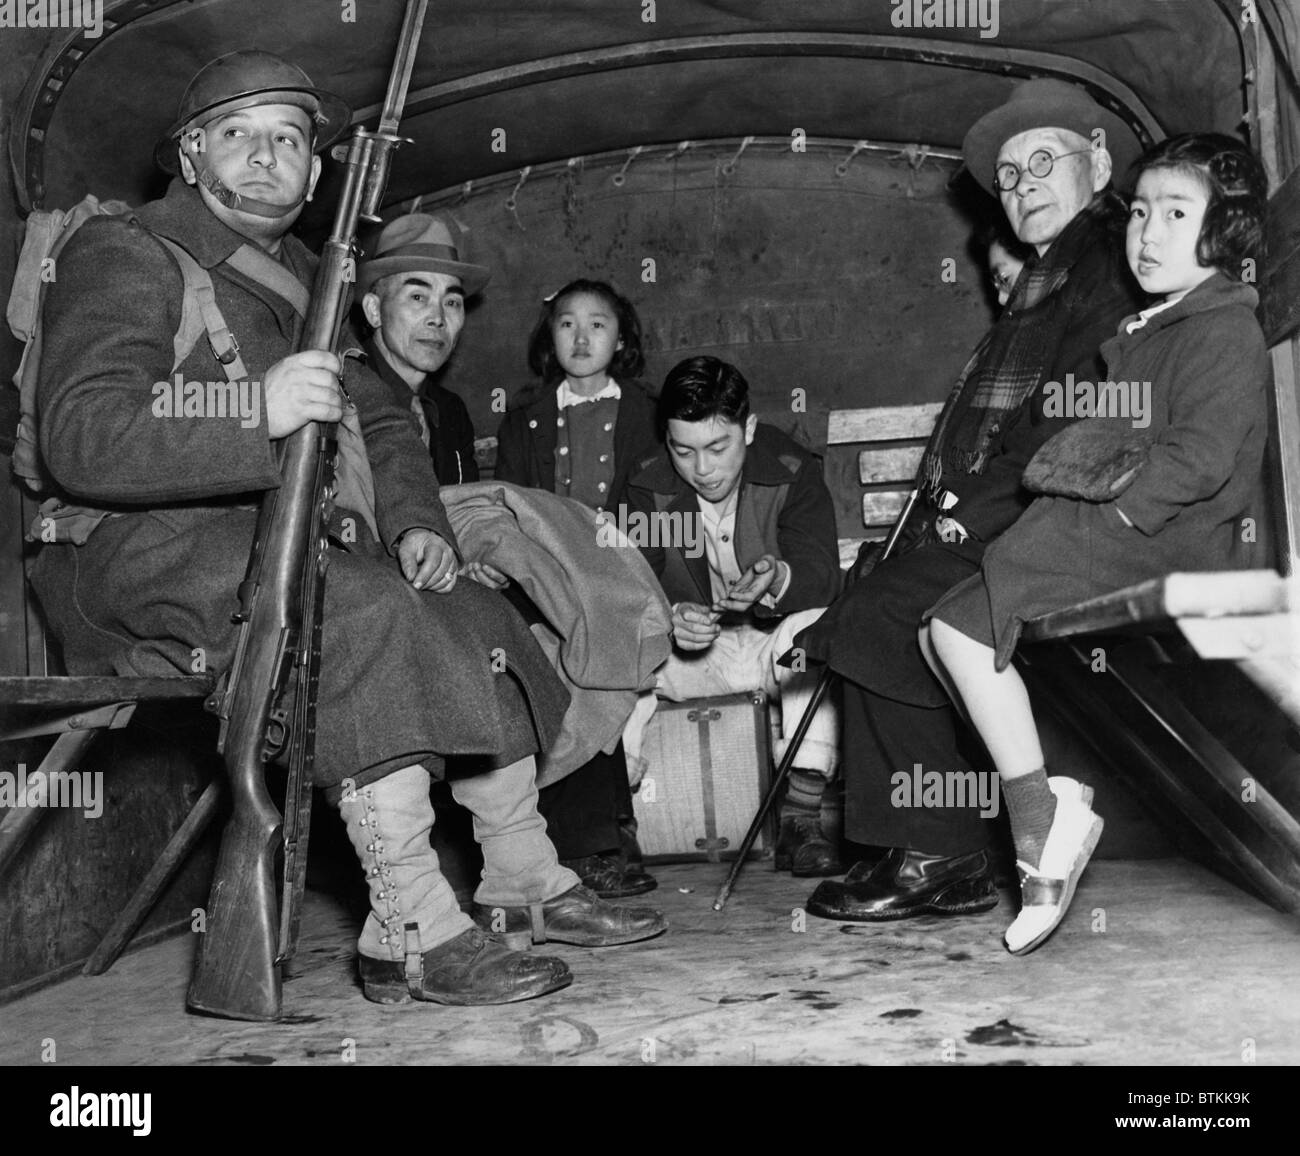 Under armed guard, parentless children and a pastor sit in the back of truck for their evacuation from Bainbridge Island, during the World War II internment of Japanese Americans. The orphans were interned at Manzanar's 'Children's Village,' the only orphanage in internment camps, to which 100 children from Alaska to San Diego were sent for the duration of the war. 1942. Stock Photo